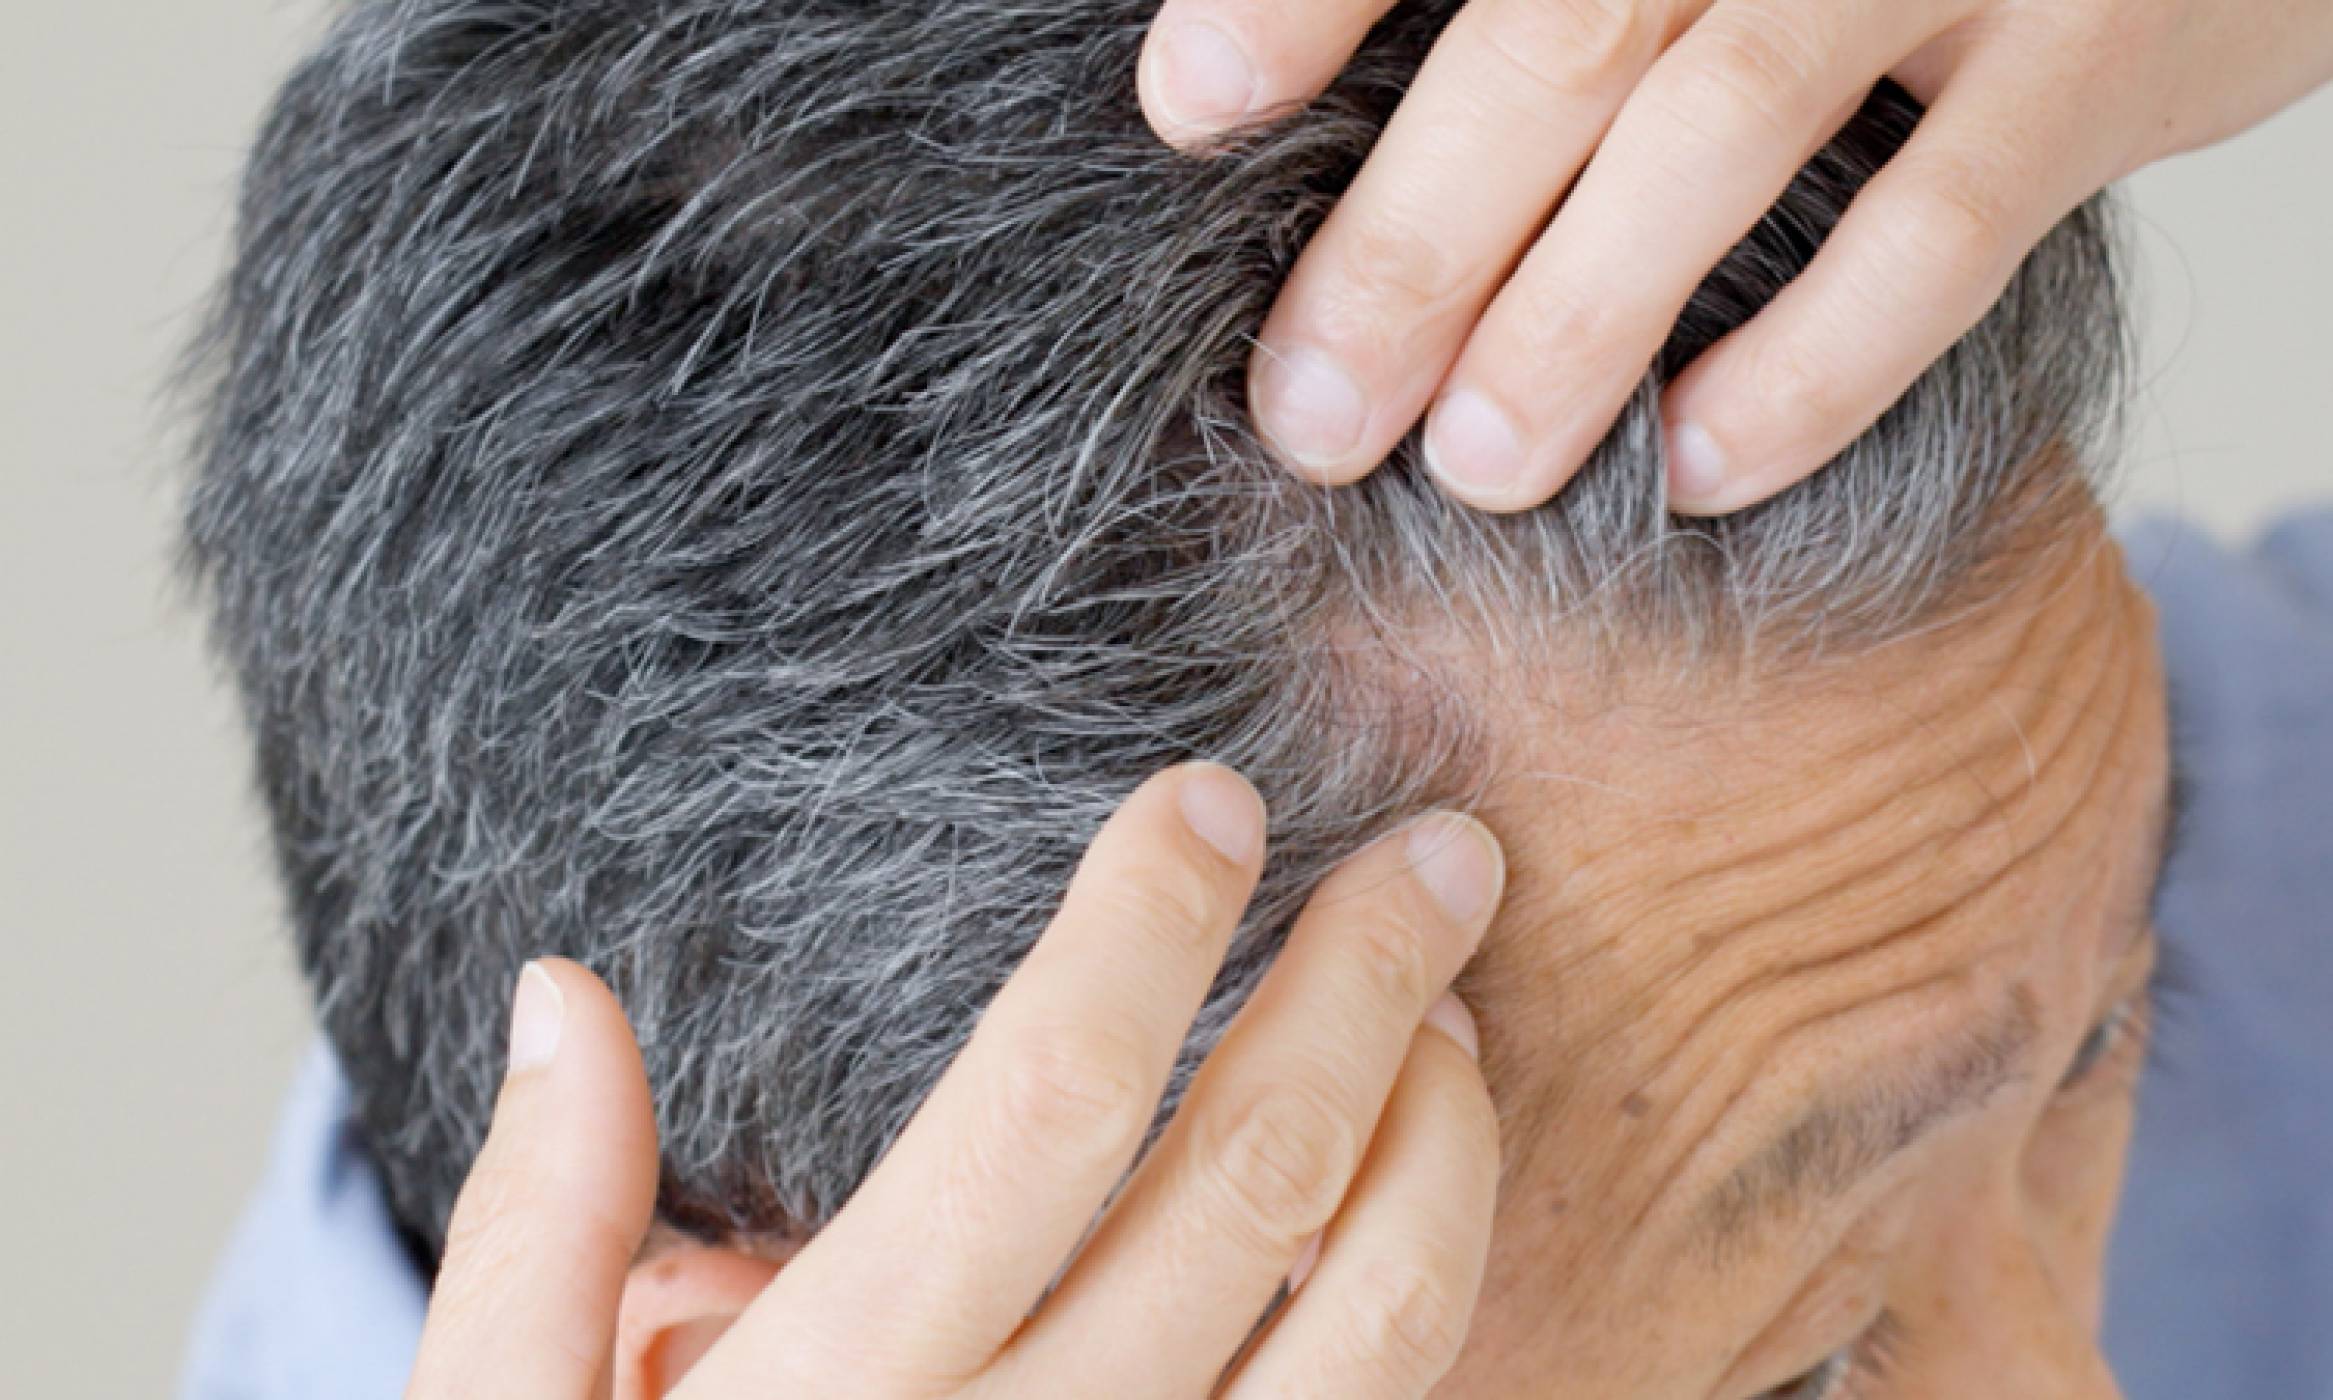 Close-up of a man's scalp as he parts his grey hair with his fingers, pointing at the roots of his hair.